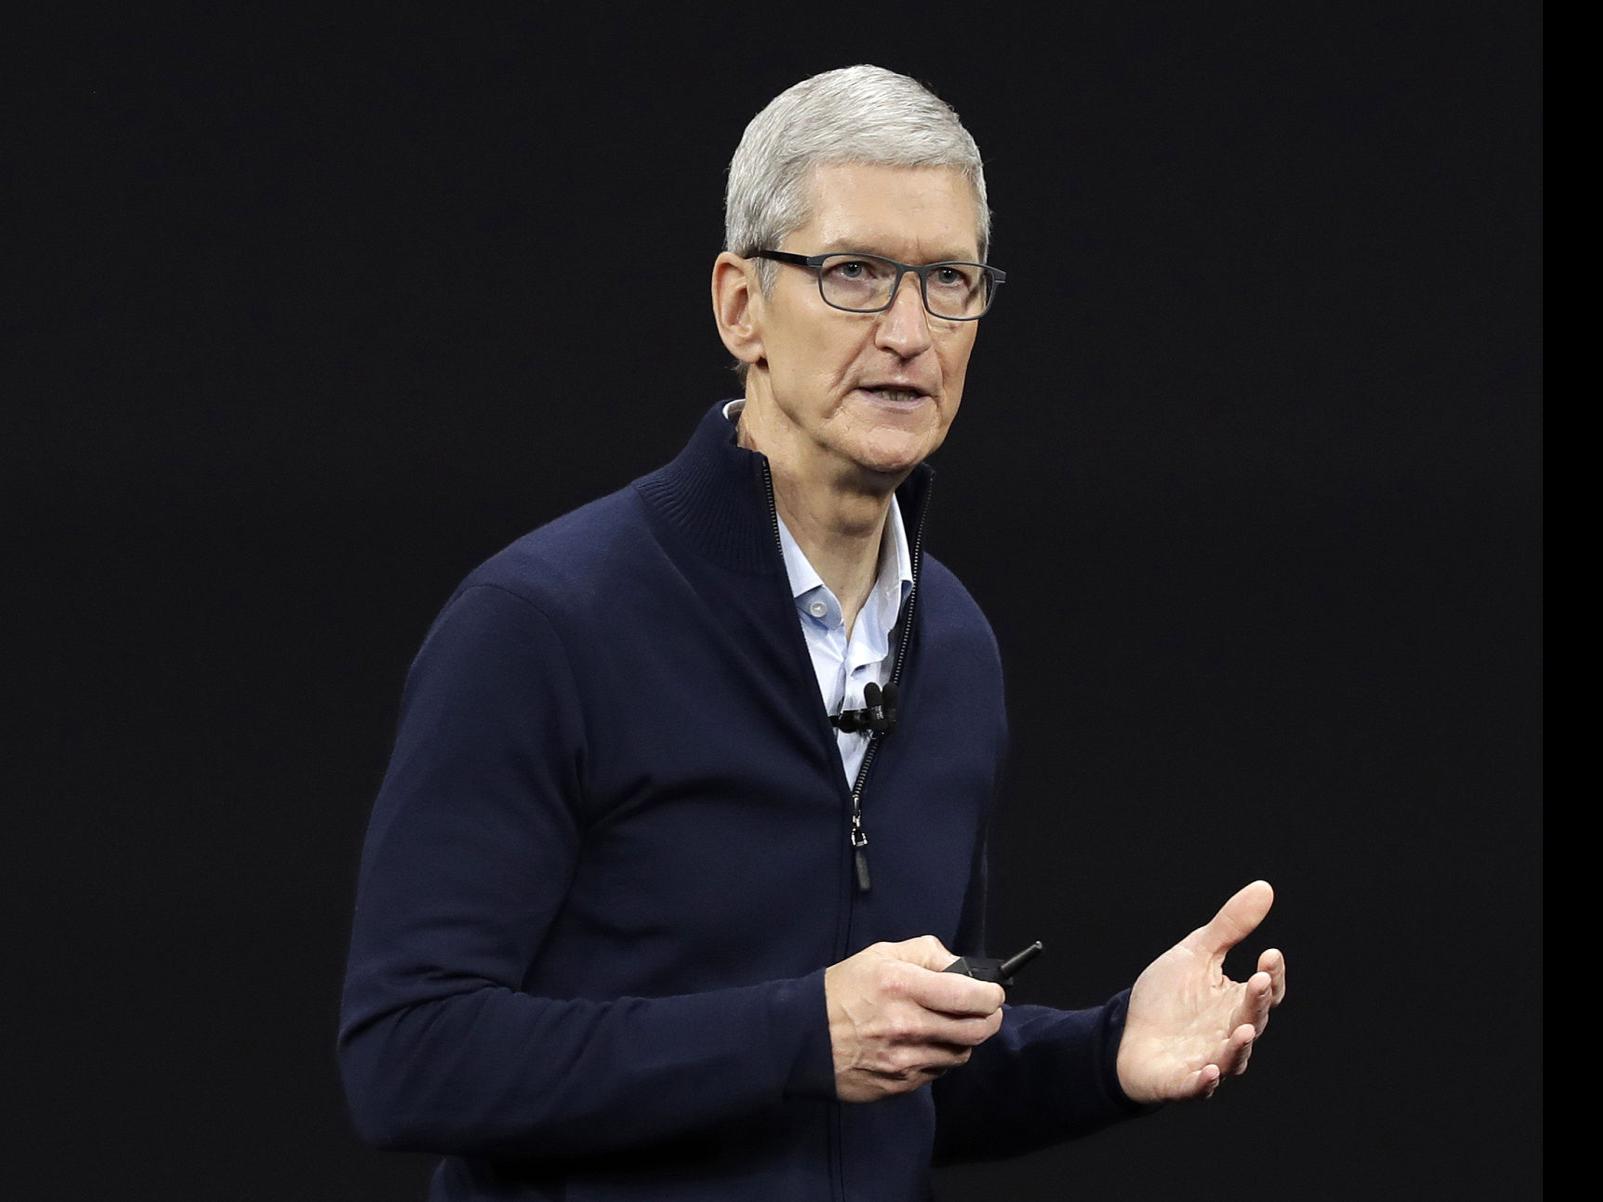 Apple CEO Tim Cook to give Tulane University's 2019 commencement speech | |